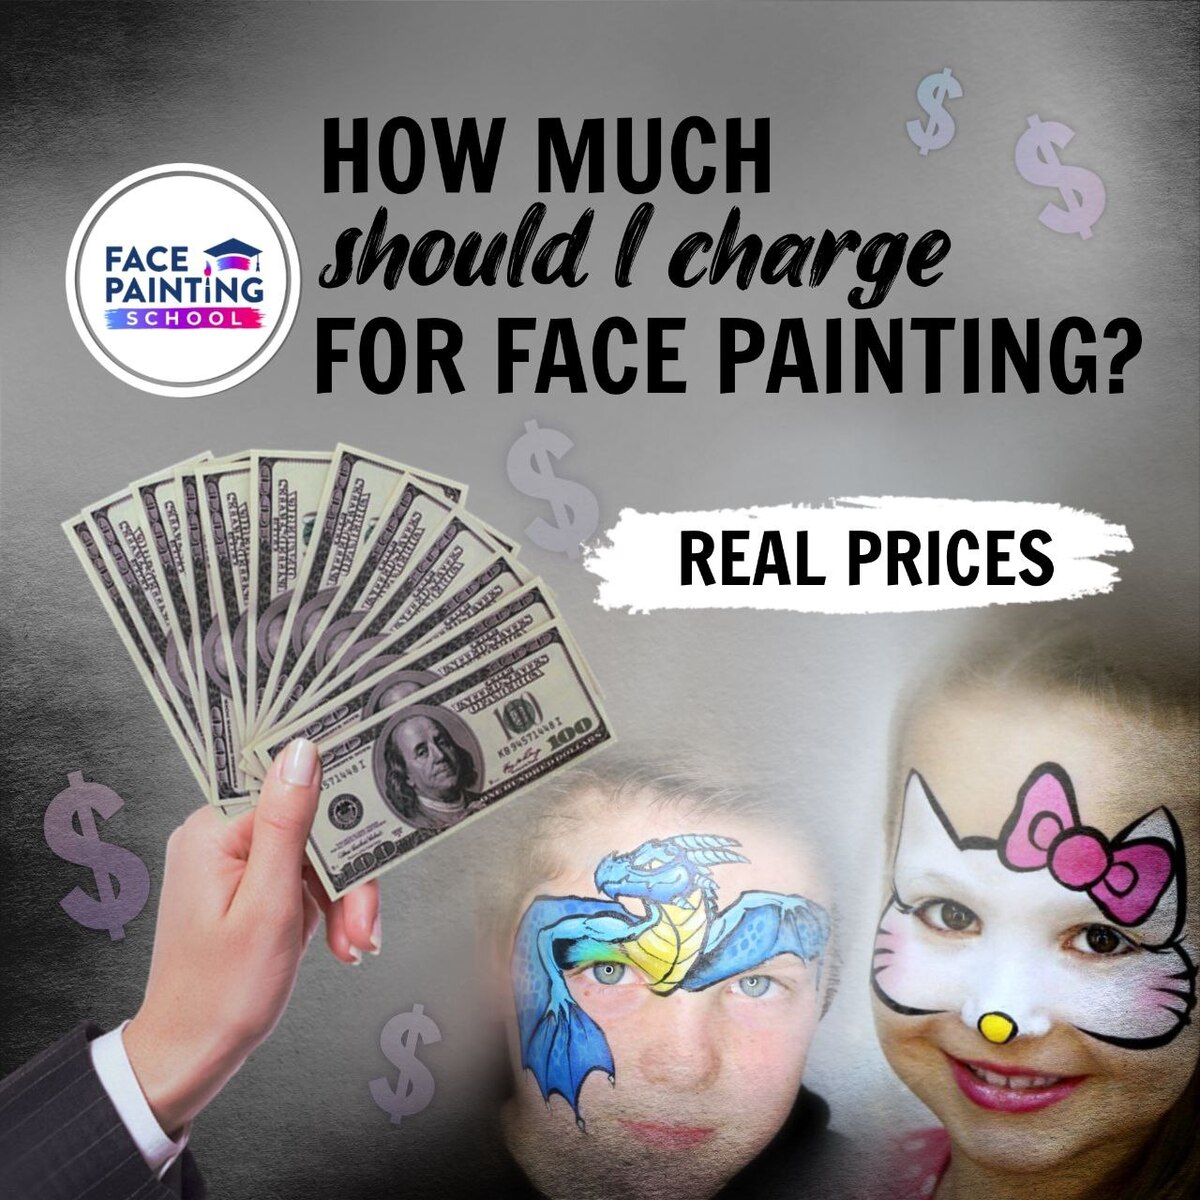 Face Painting - BEYOND TWISTING PARTIES